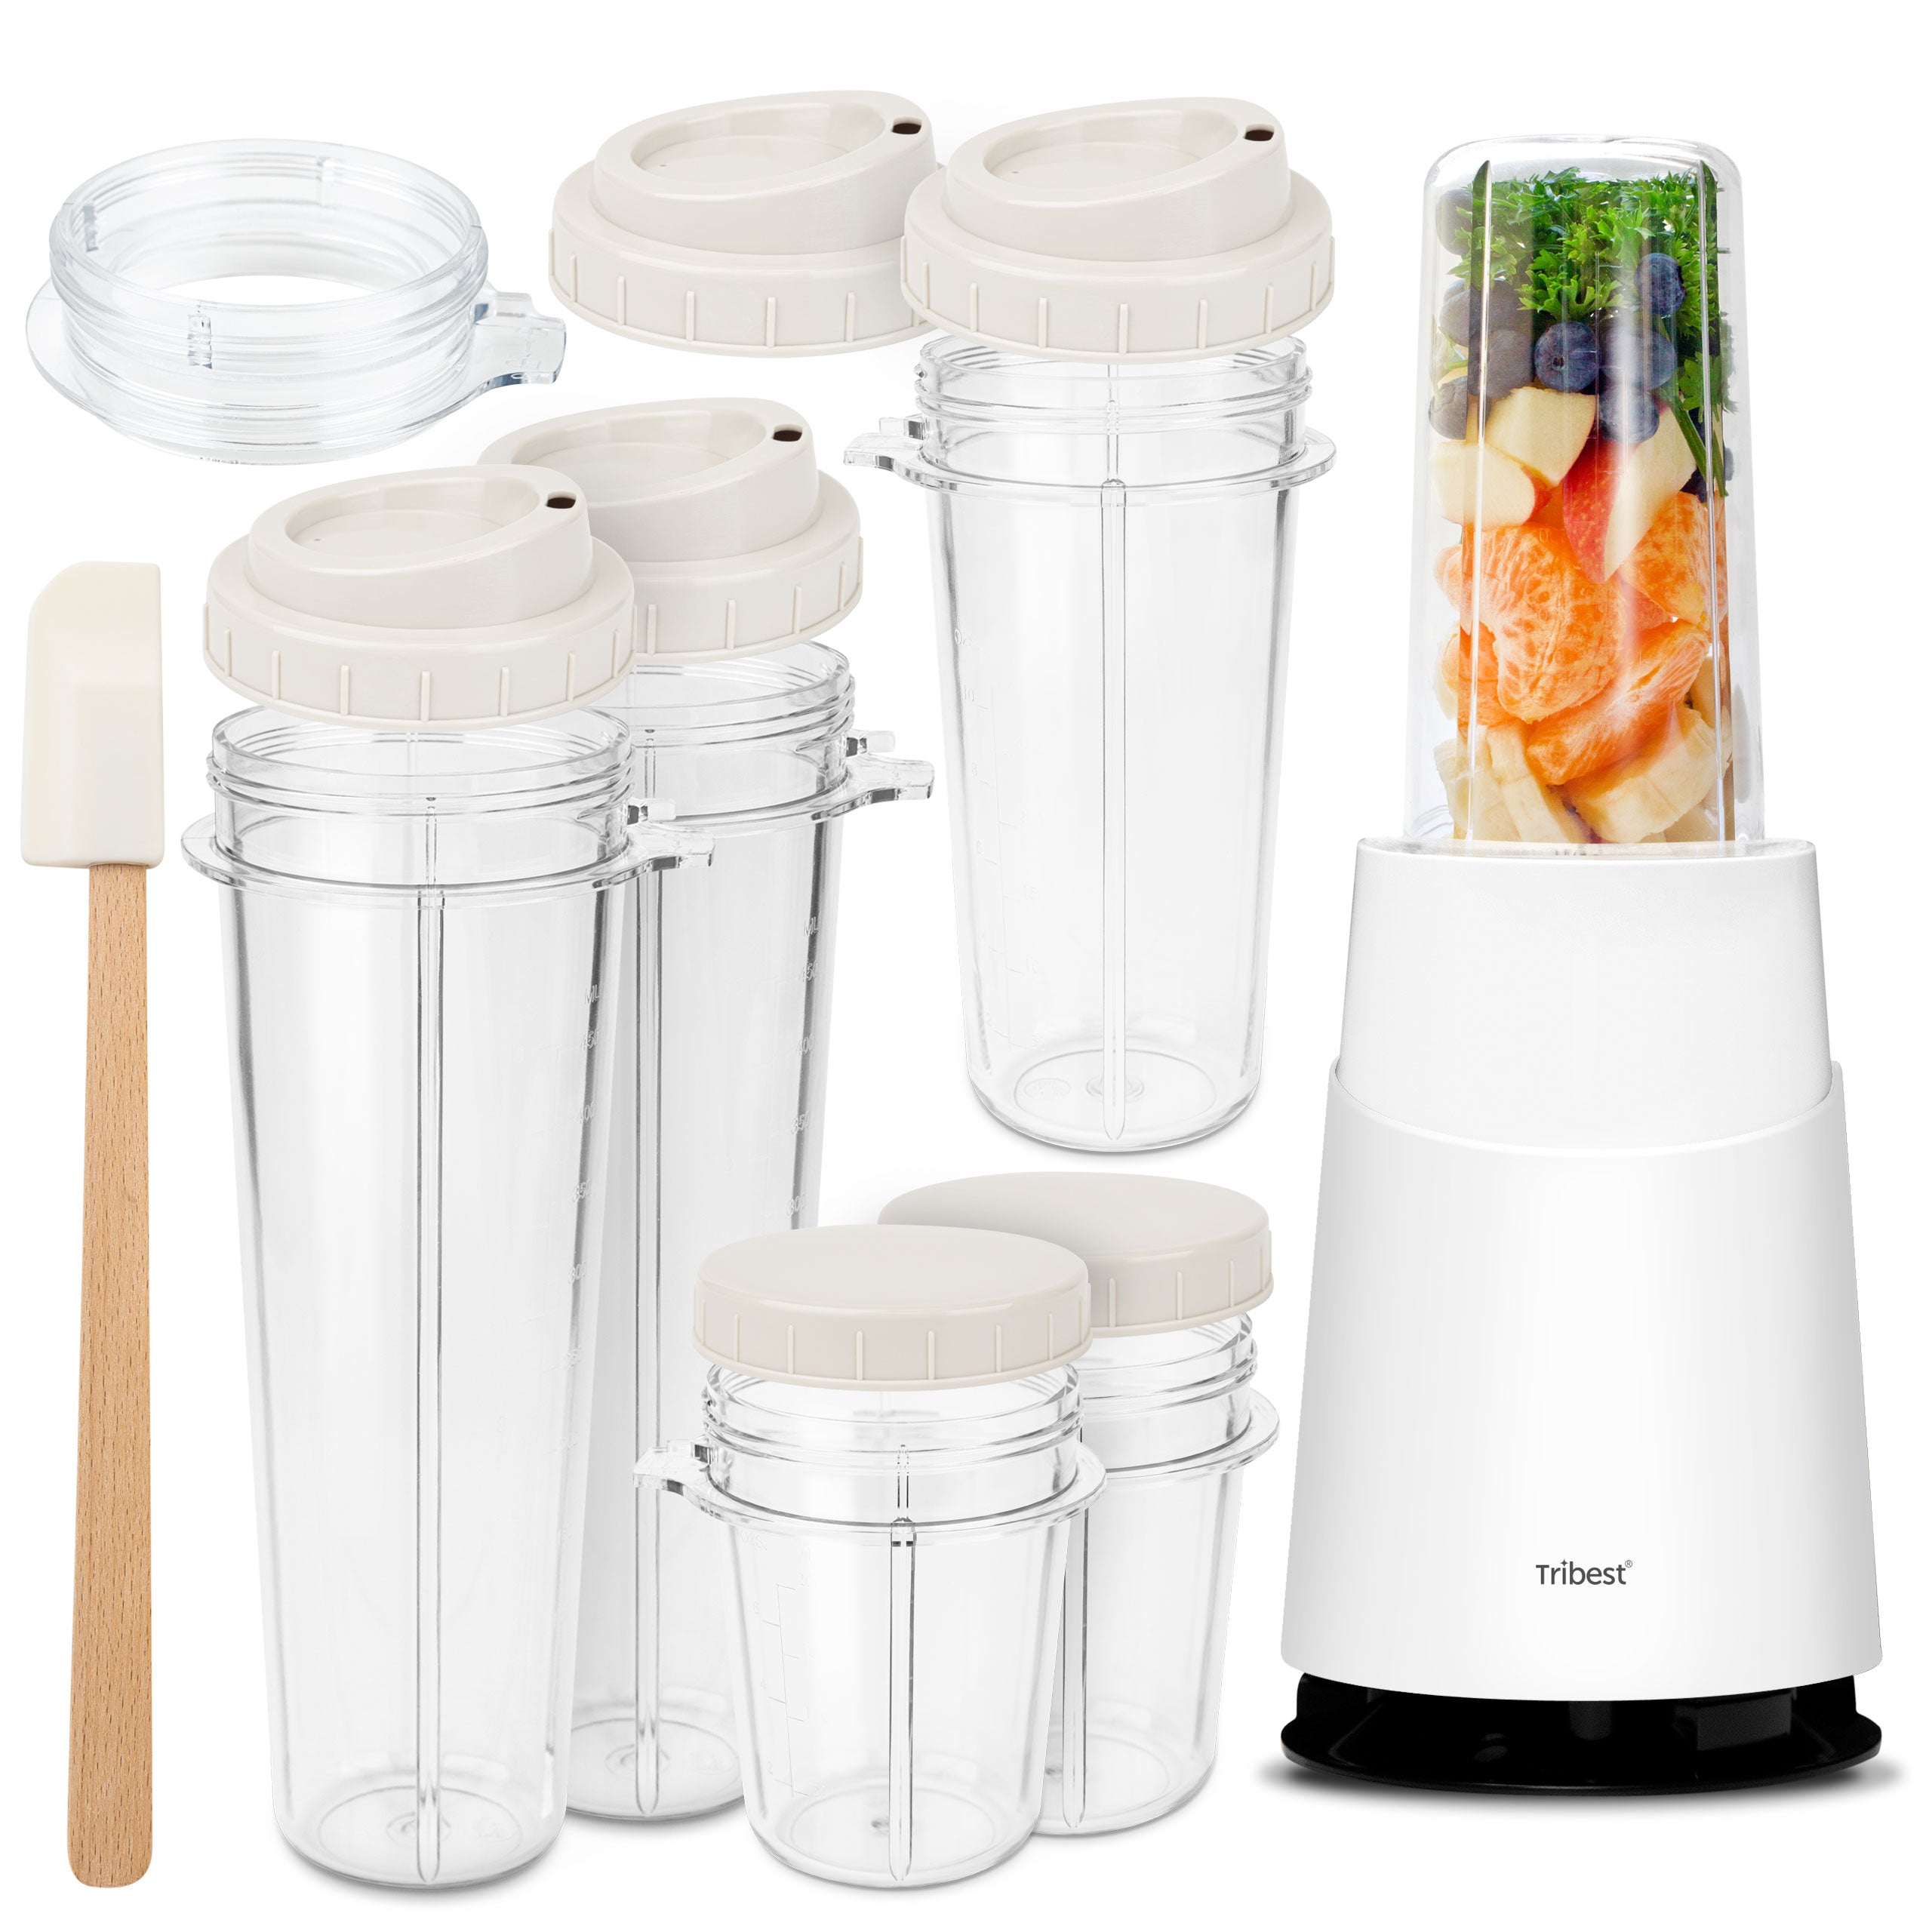 Personal Blender II Mason Jar Ready (Family16-Piece Set) in White PB-420WH-A - Tribest